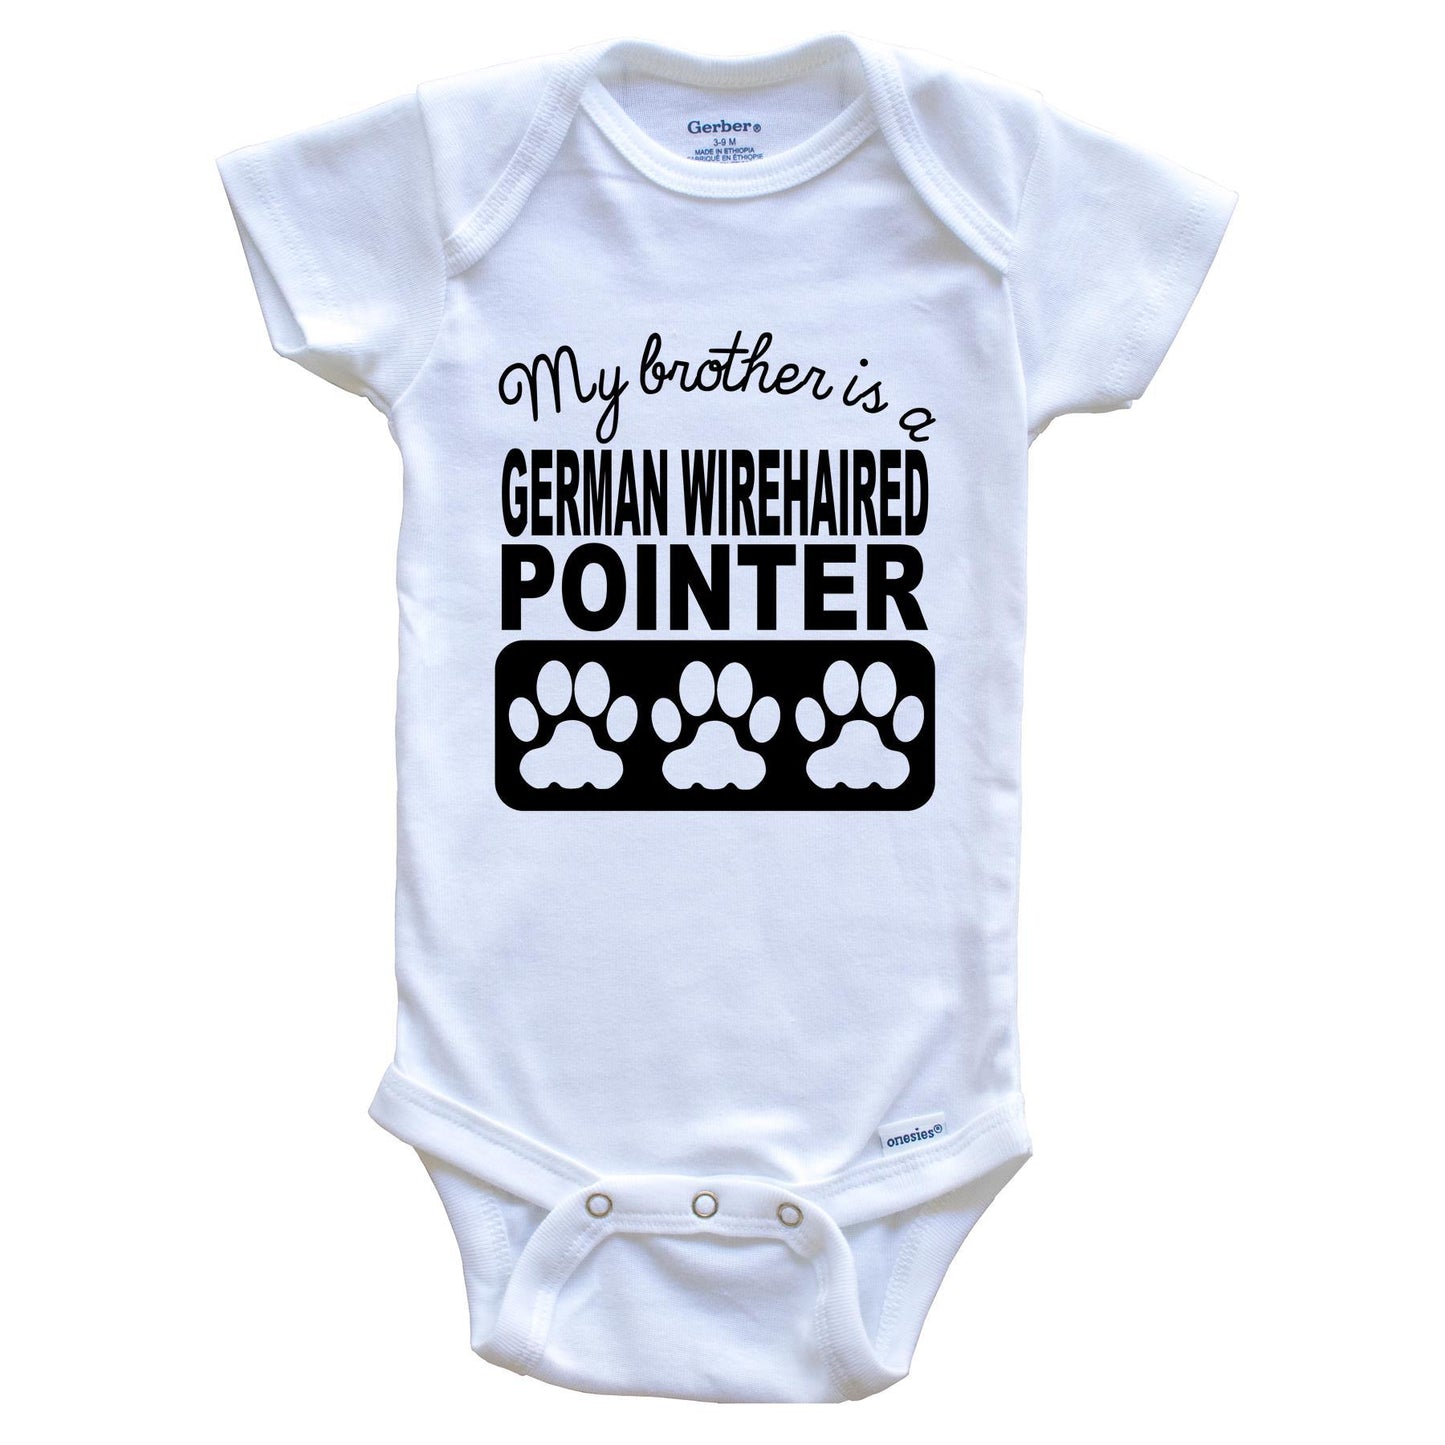 My Brother Is A German Wirehaired Pointer Baby Onesie